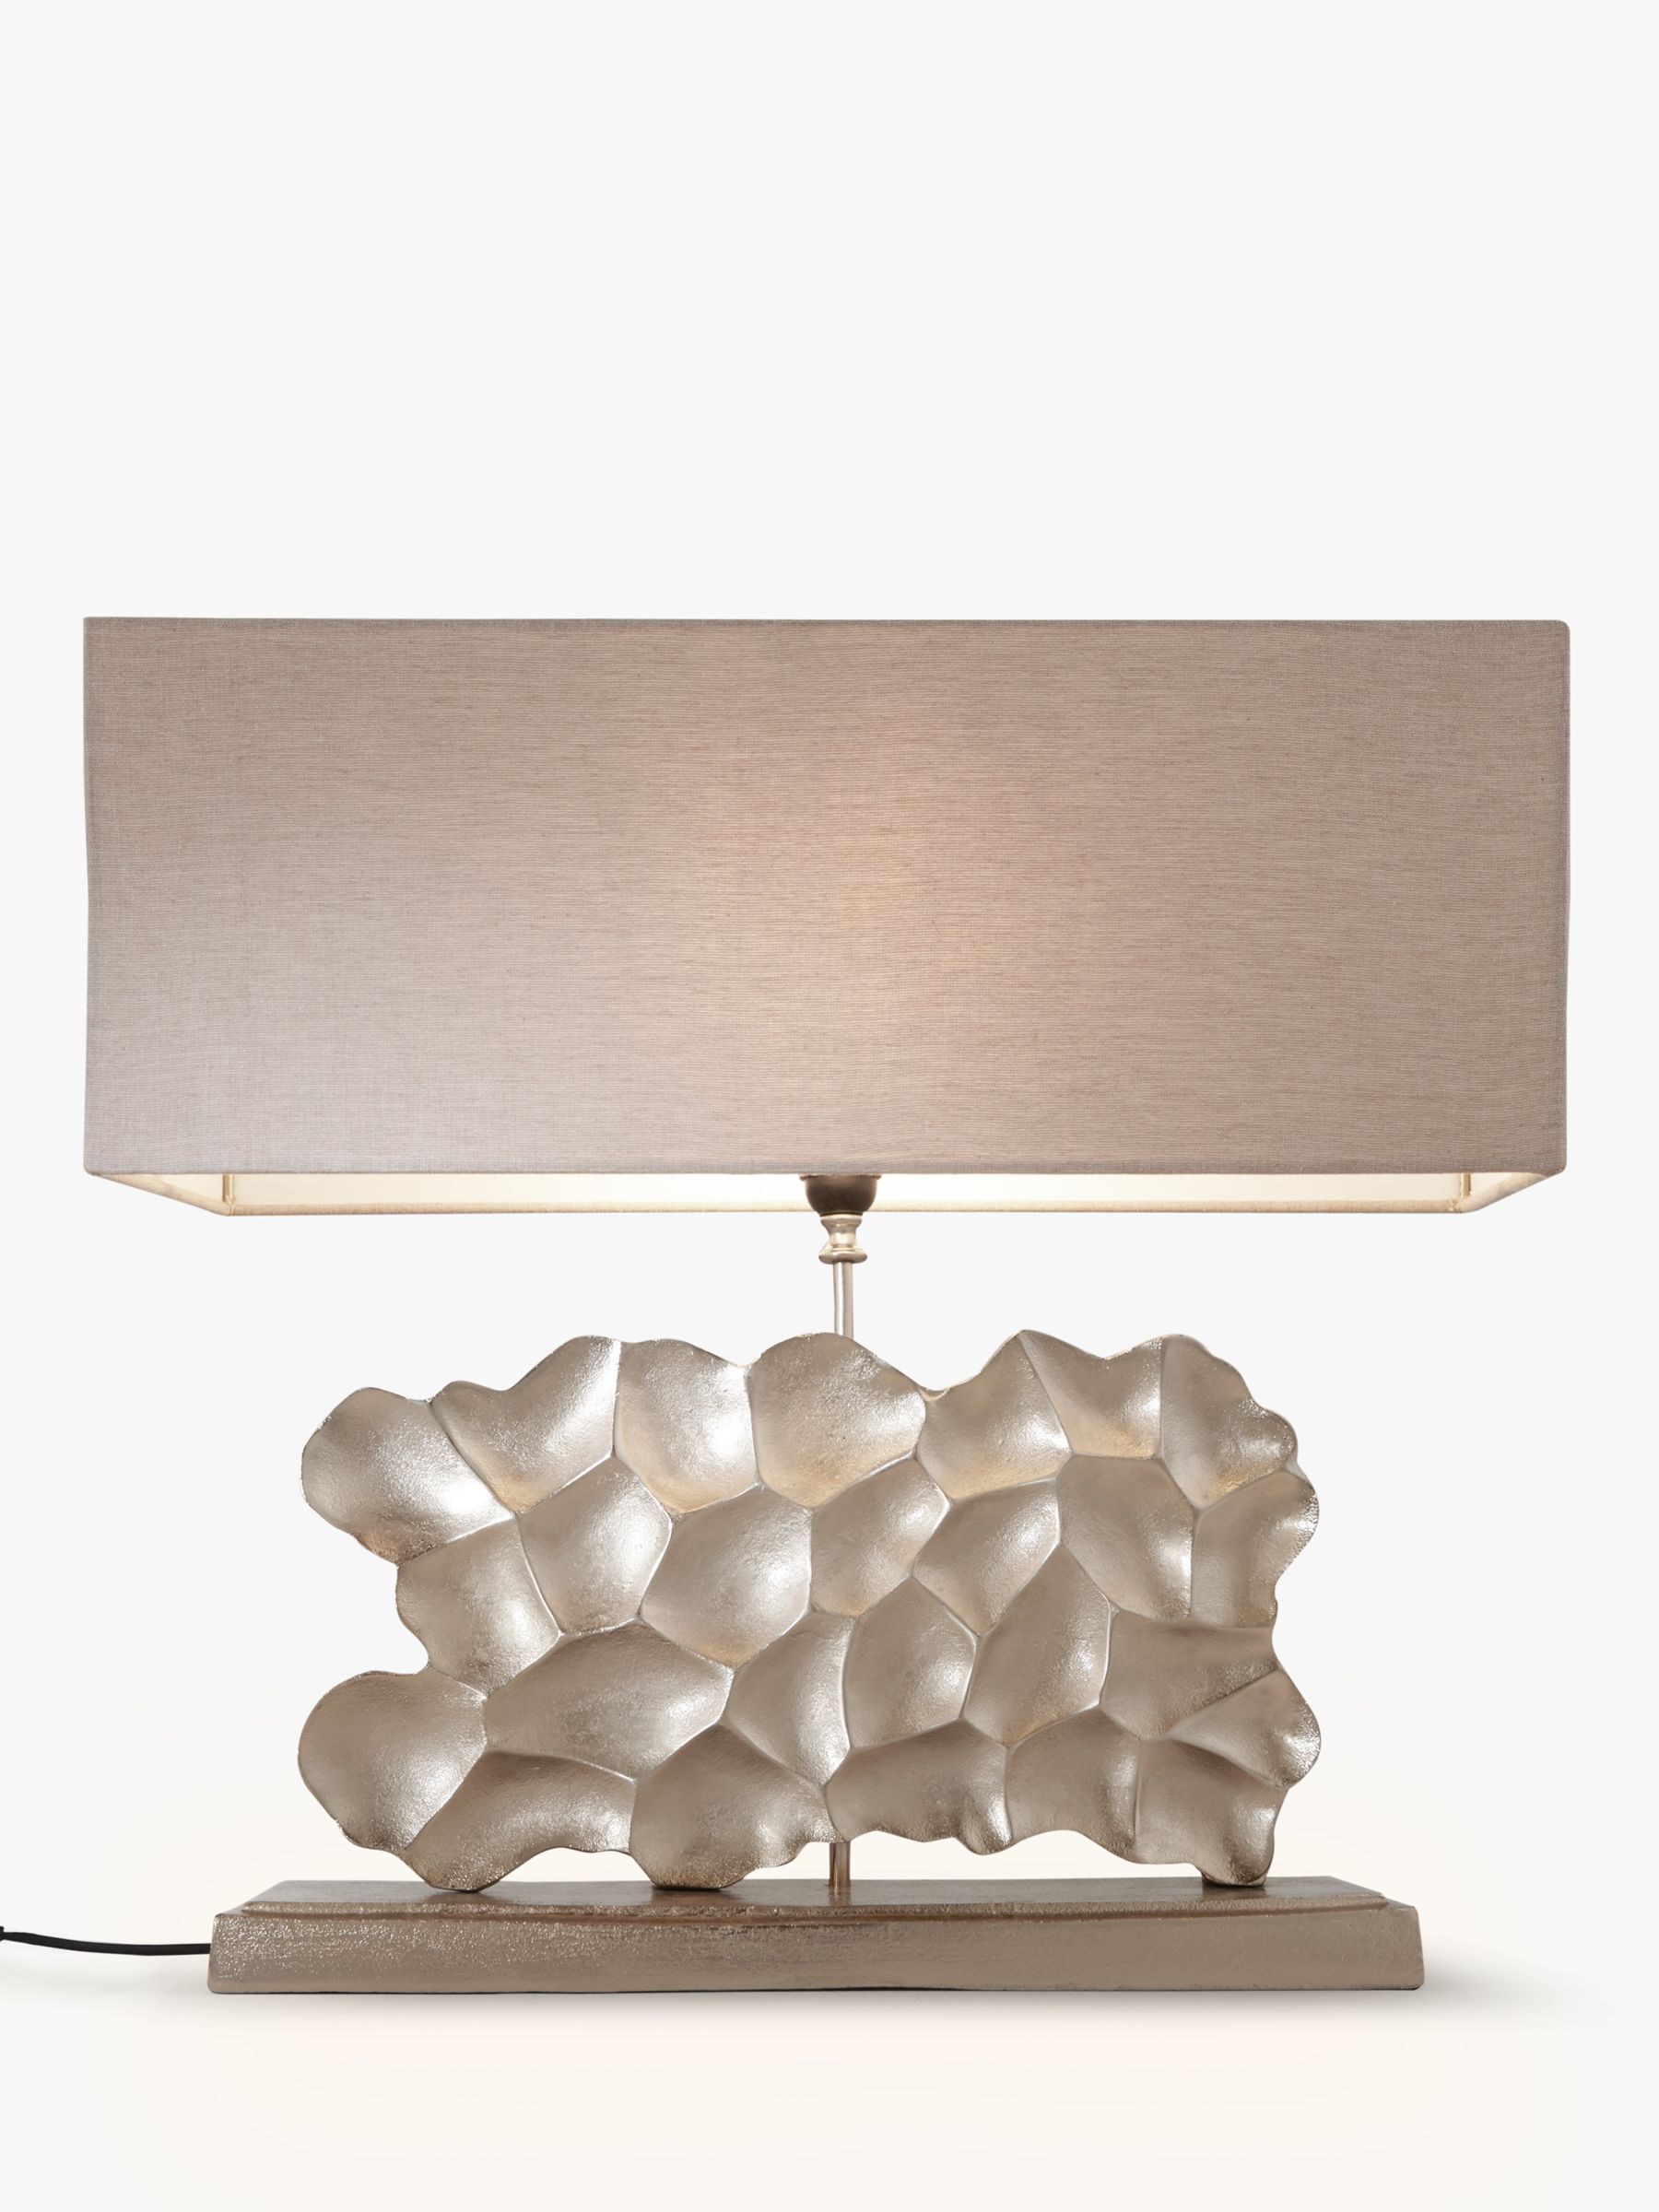 Pacific Lifestyle Mere Sculptured Wide, Long Horizontal Table Lamp